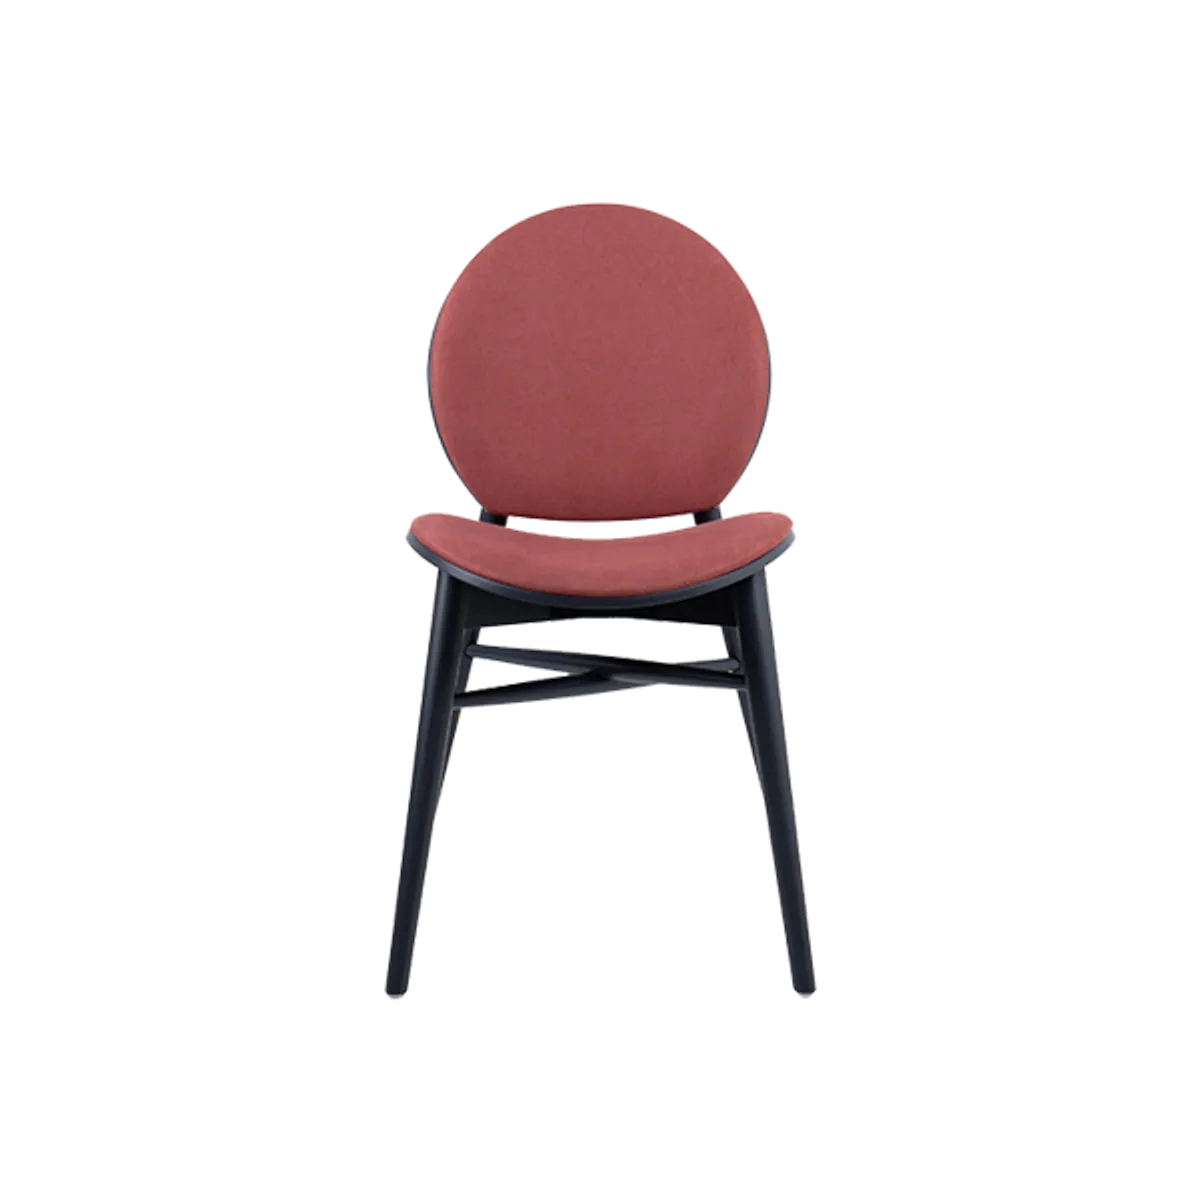 Eder soft chair 2 Inside Out Contracts